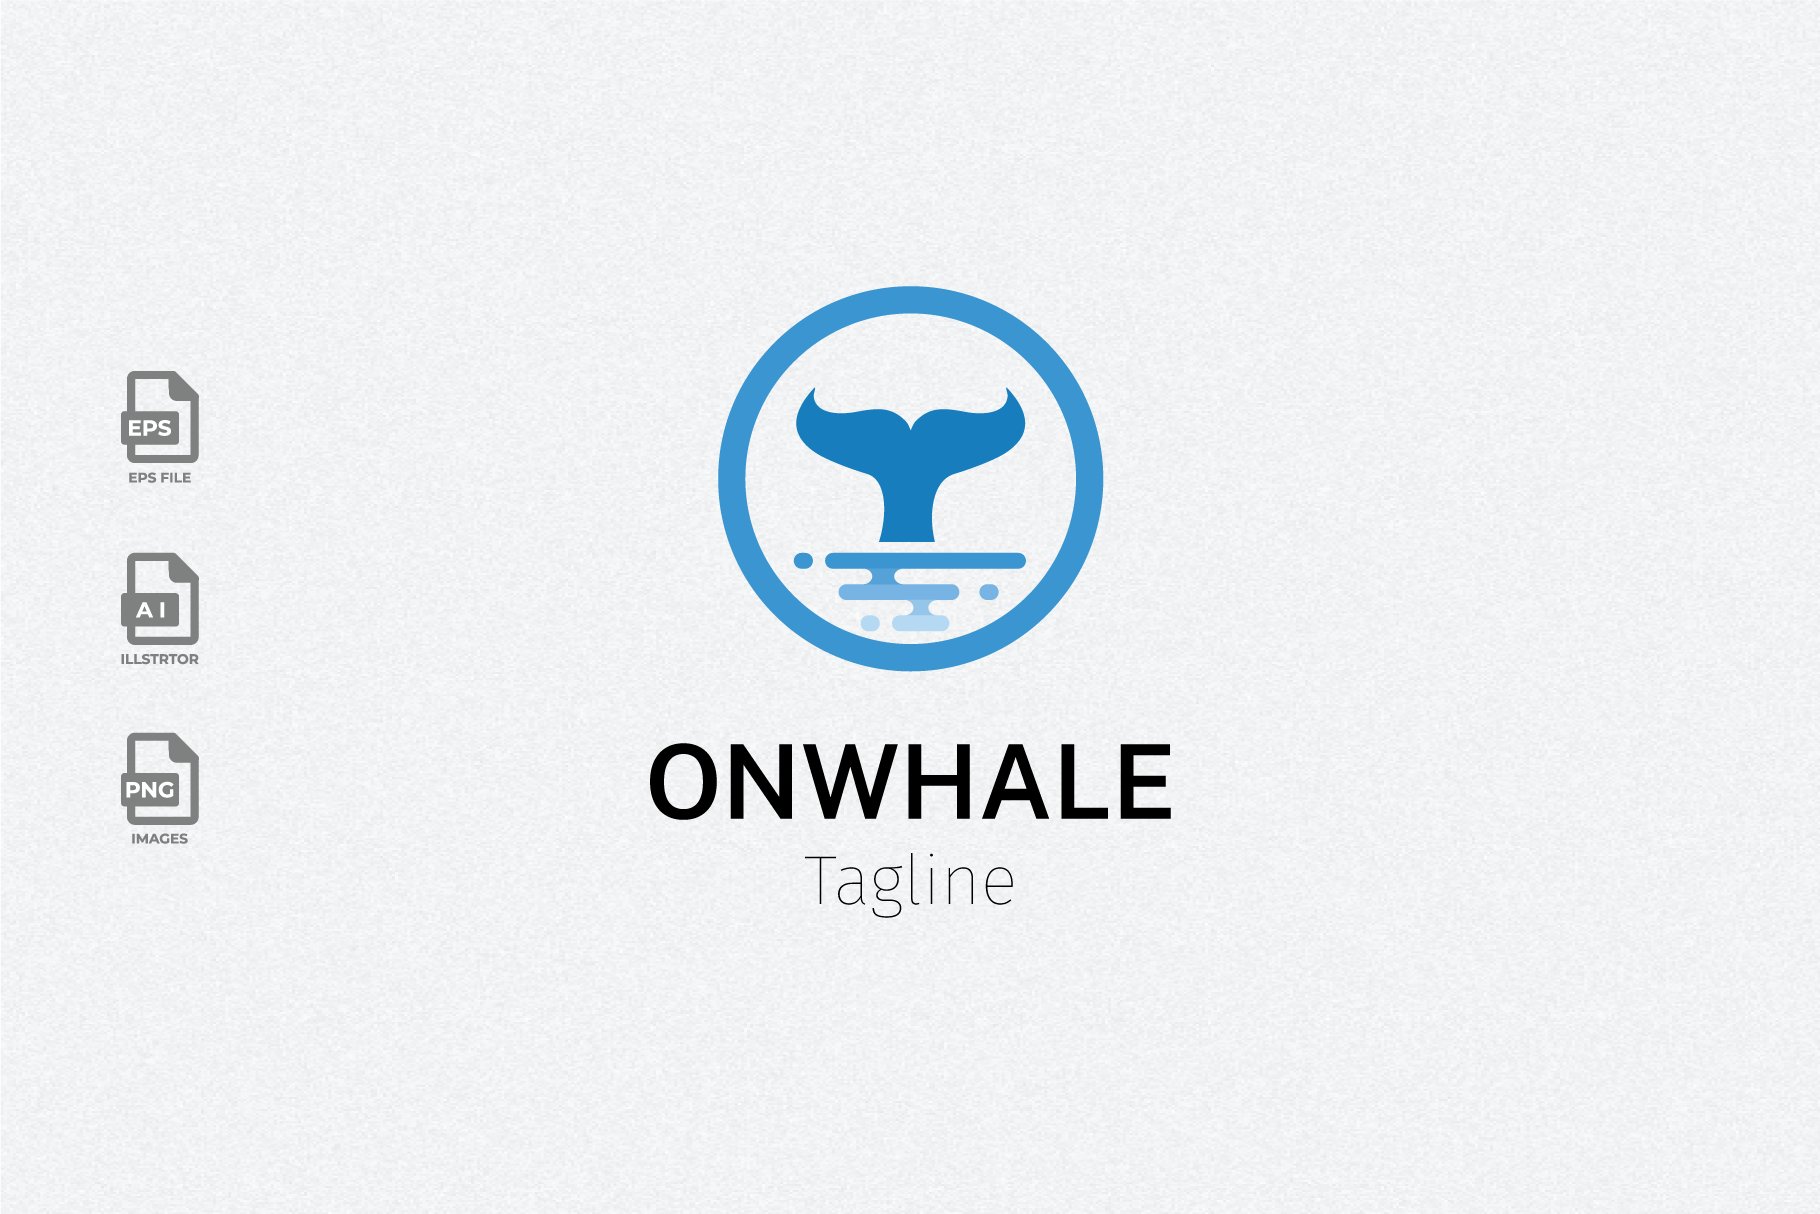 ON Whale Logo Template cover image.